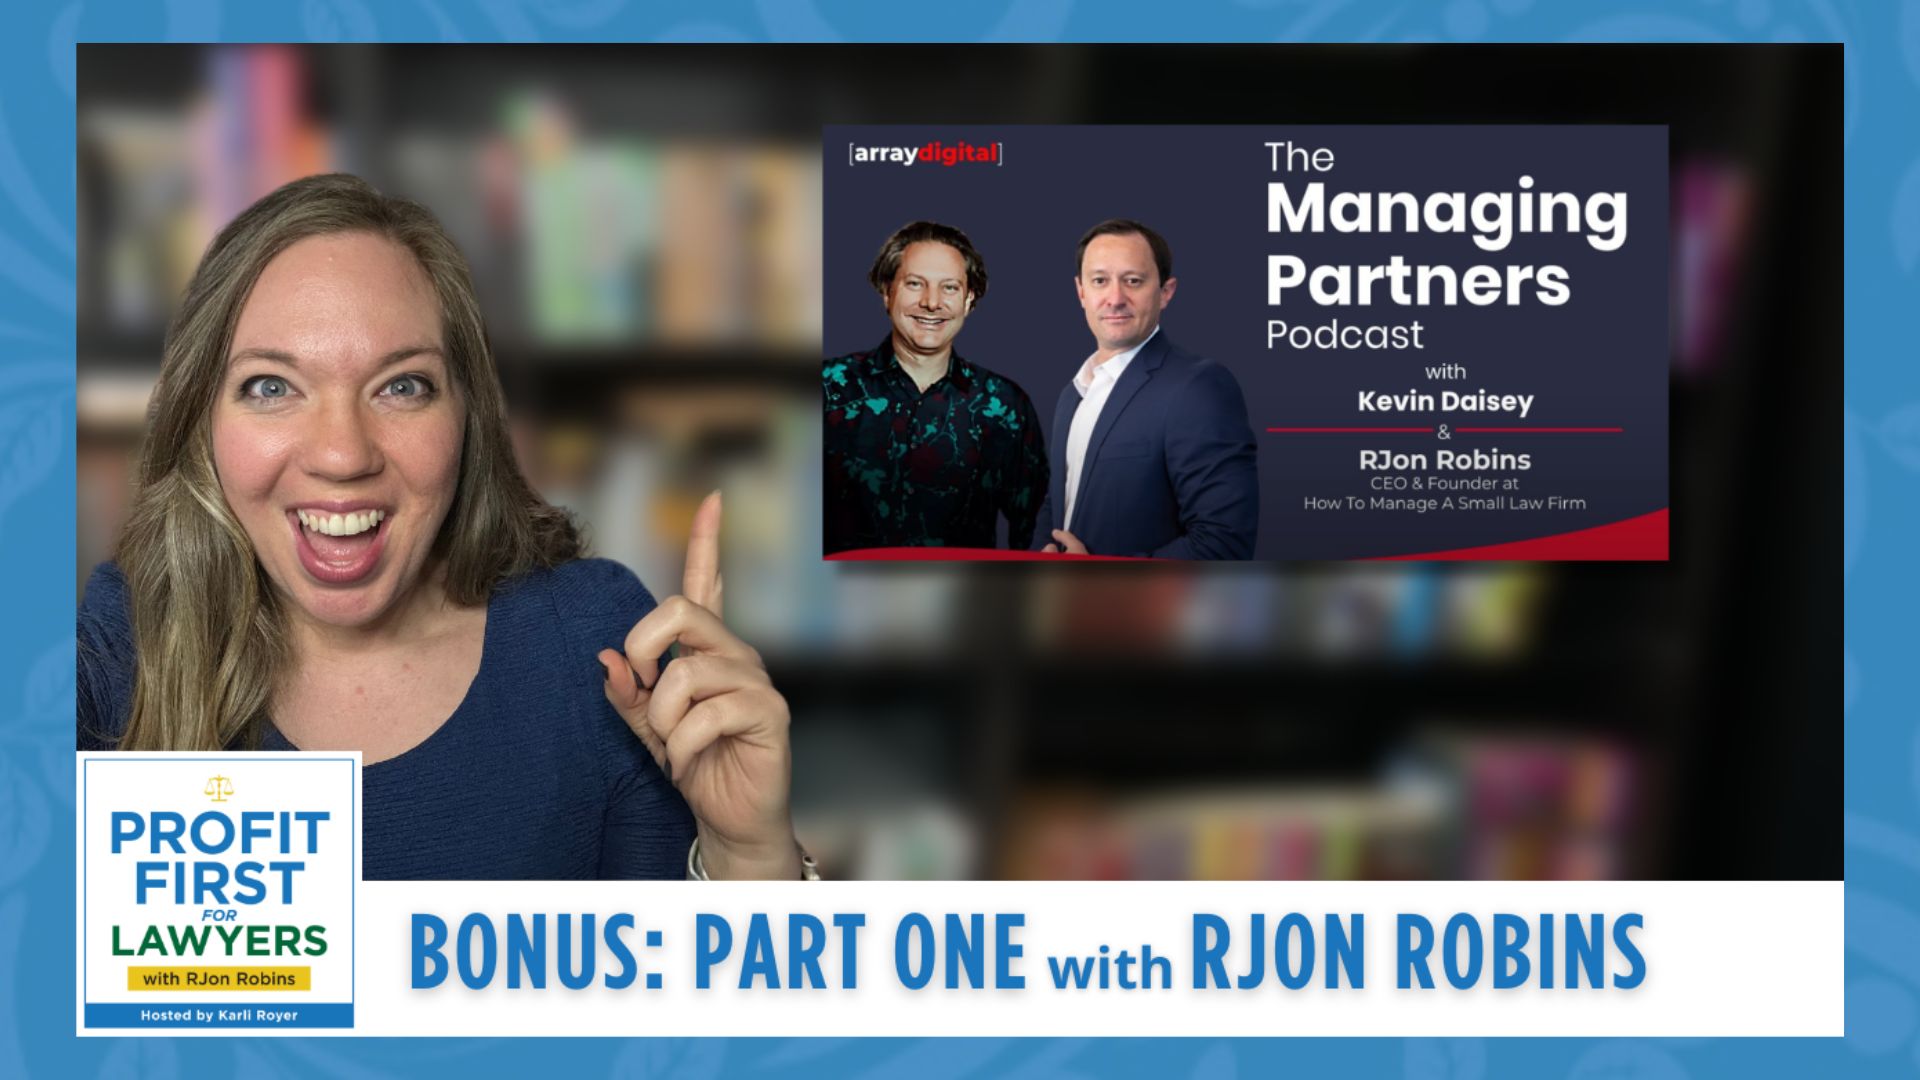 Bonus episode featured image of Karli Royer pointing up referencing part one of The Managing Partners Podcast thumbnail with an image of RJon Robins and Kevin Daisey.